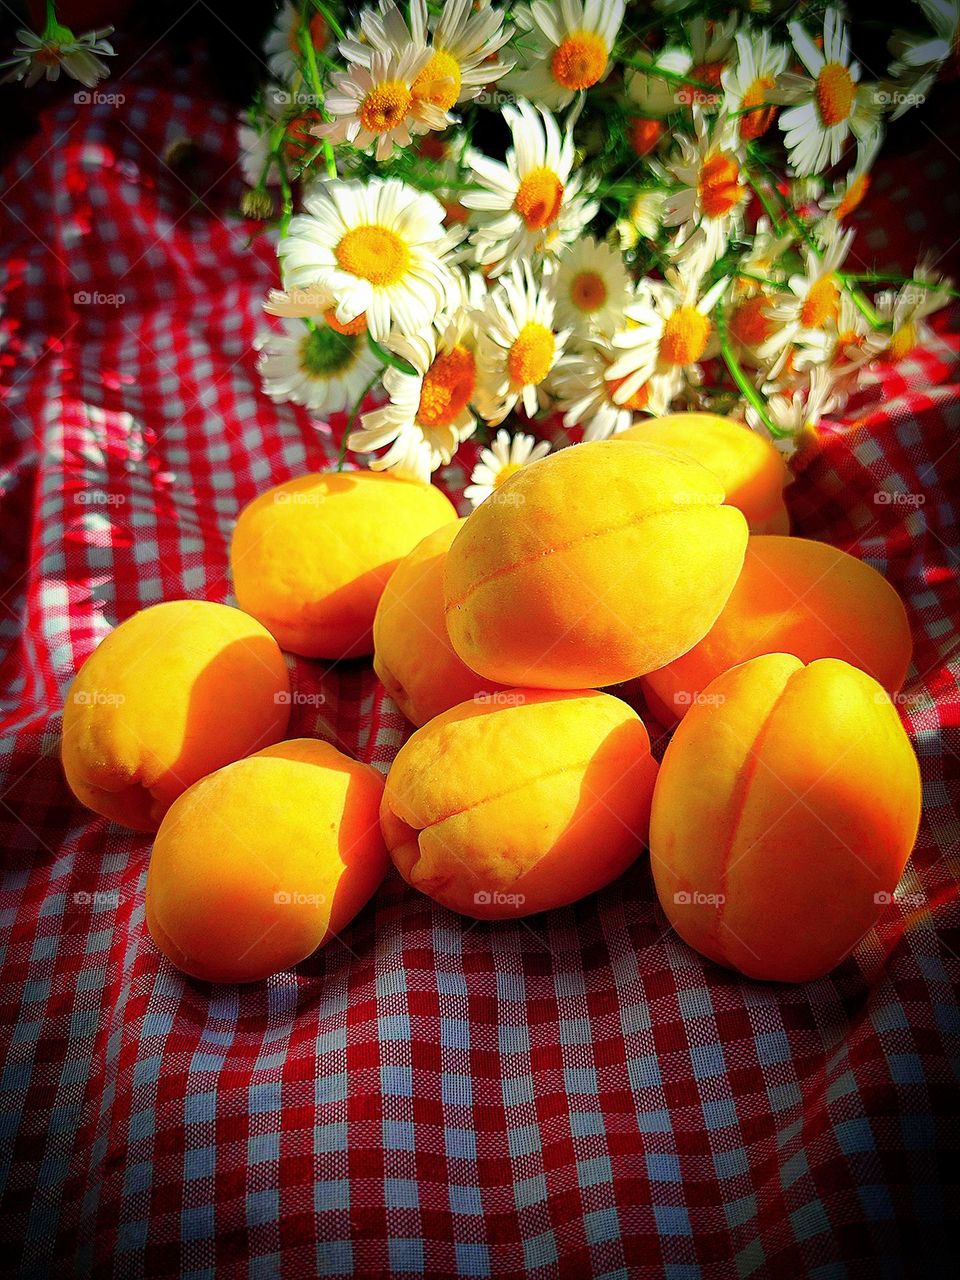 Sunny day.  Yellow apricots lie on a red-checkered fabric.  Behind the apricots is a bouquet of daisies.  The sun's rays flood fruits and flowers with their warmth